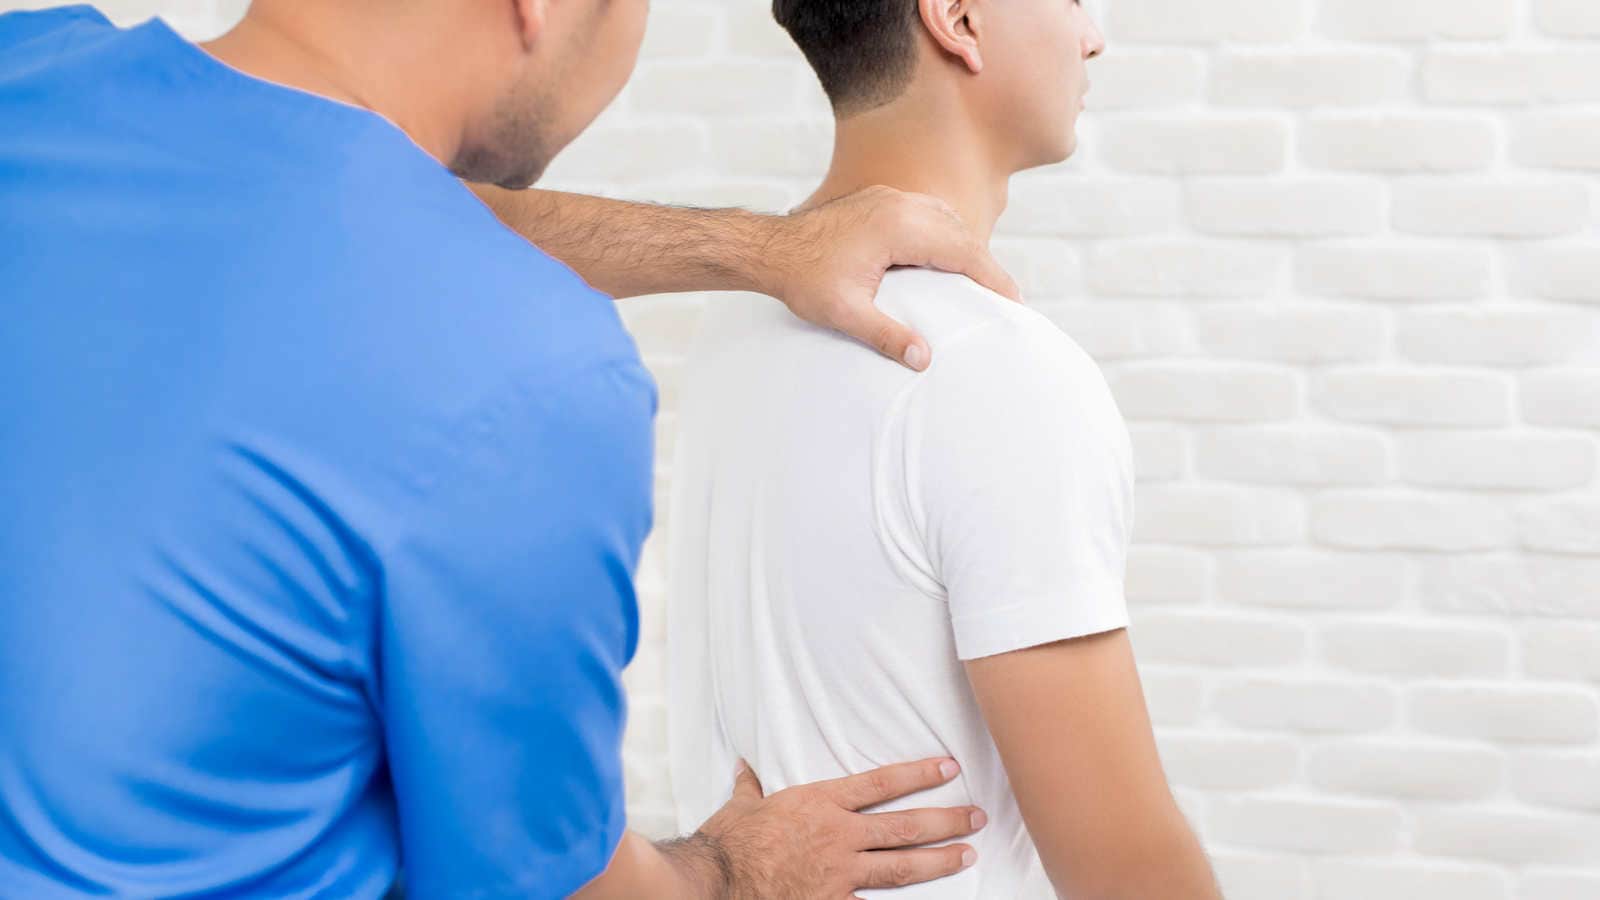 Whole Health Chiropractic in Los Angeles